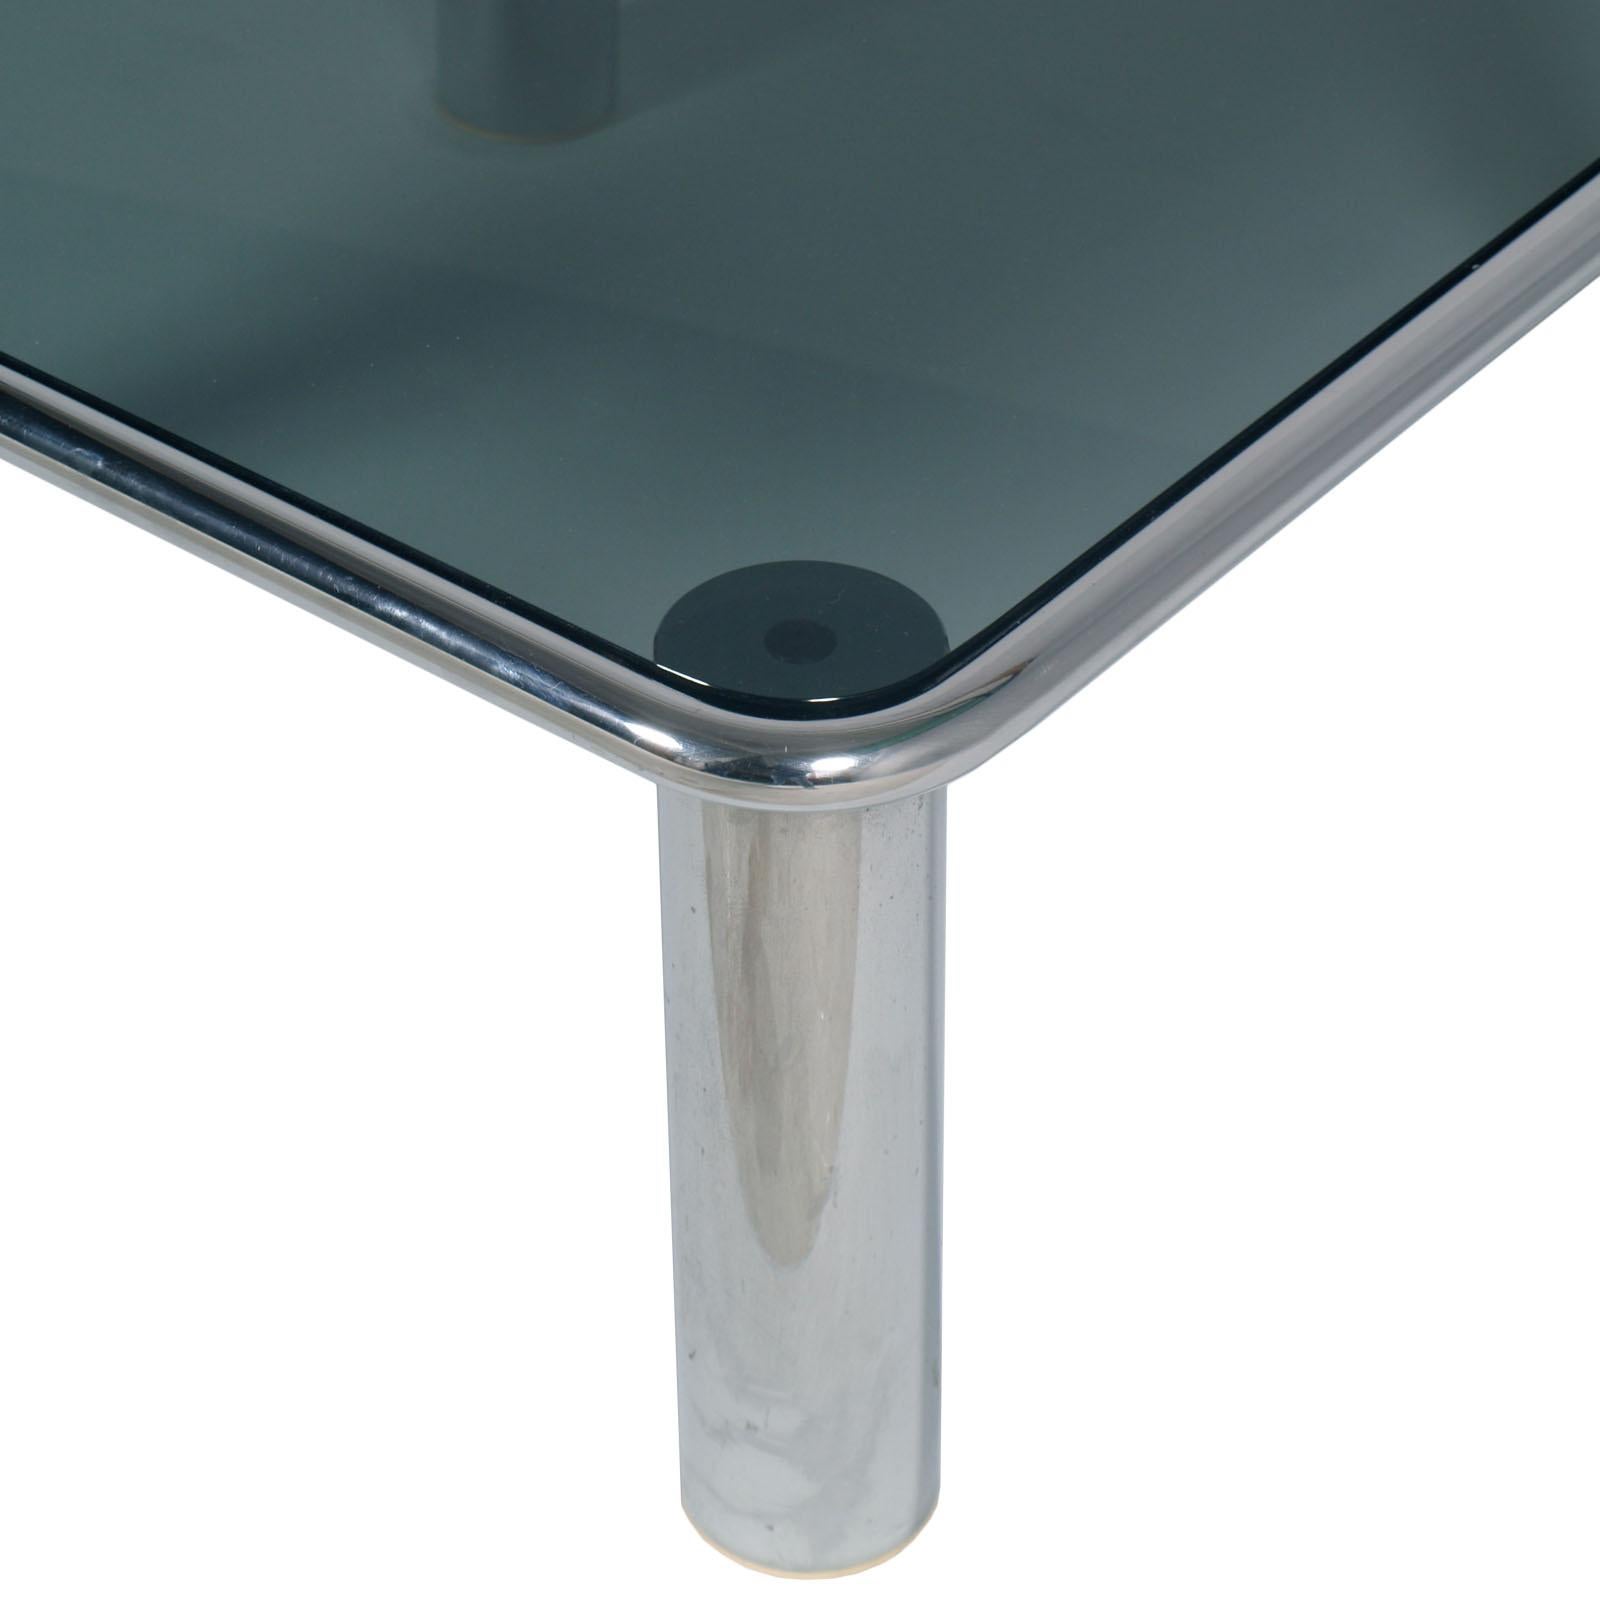 20th Century Mid-Century Modern Chrome Coffee Table Glass Fumè Top by G. Frattini for Cassina For Sale